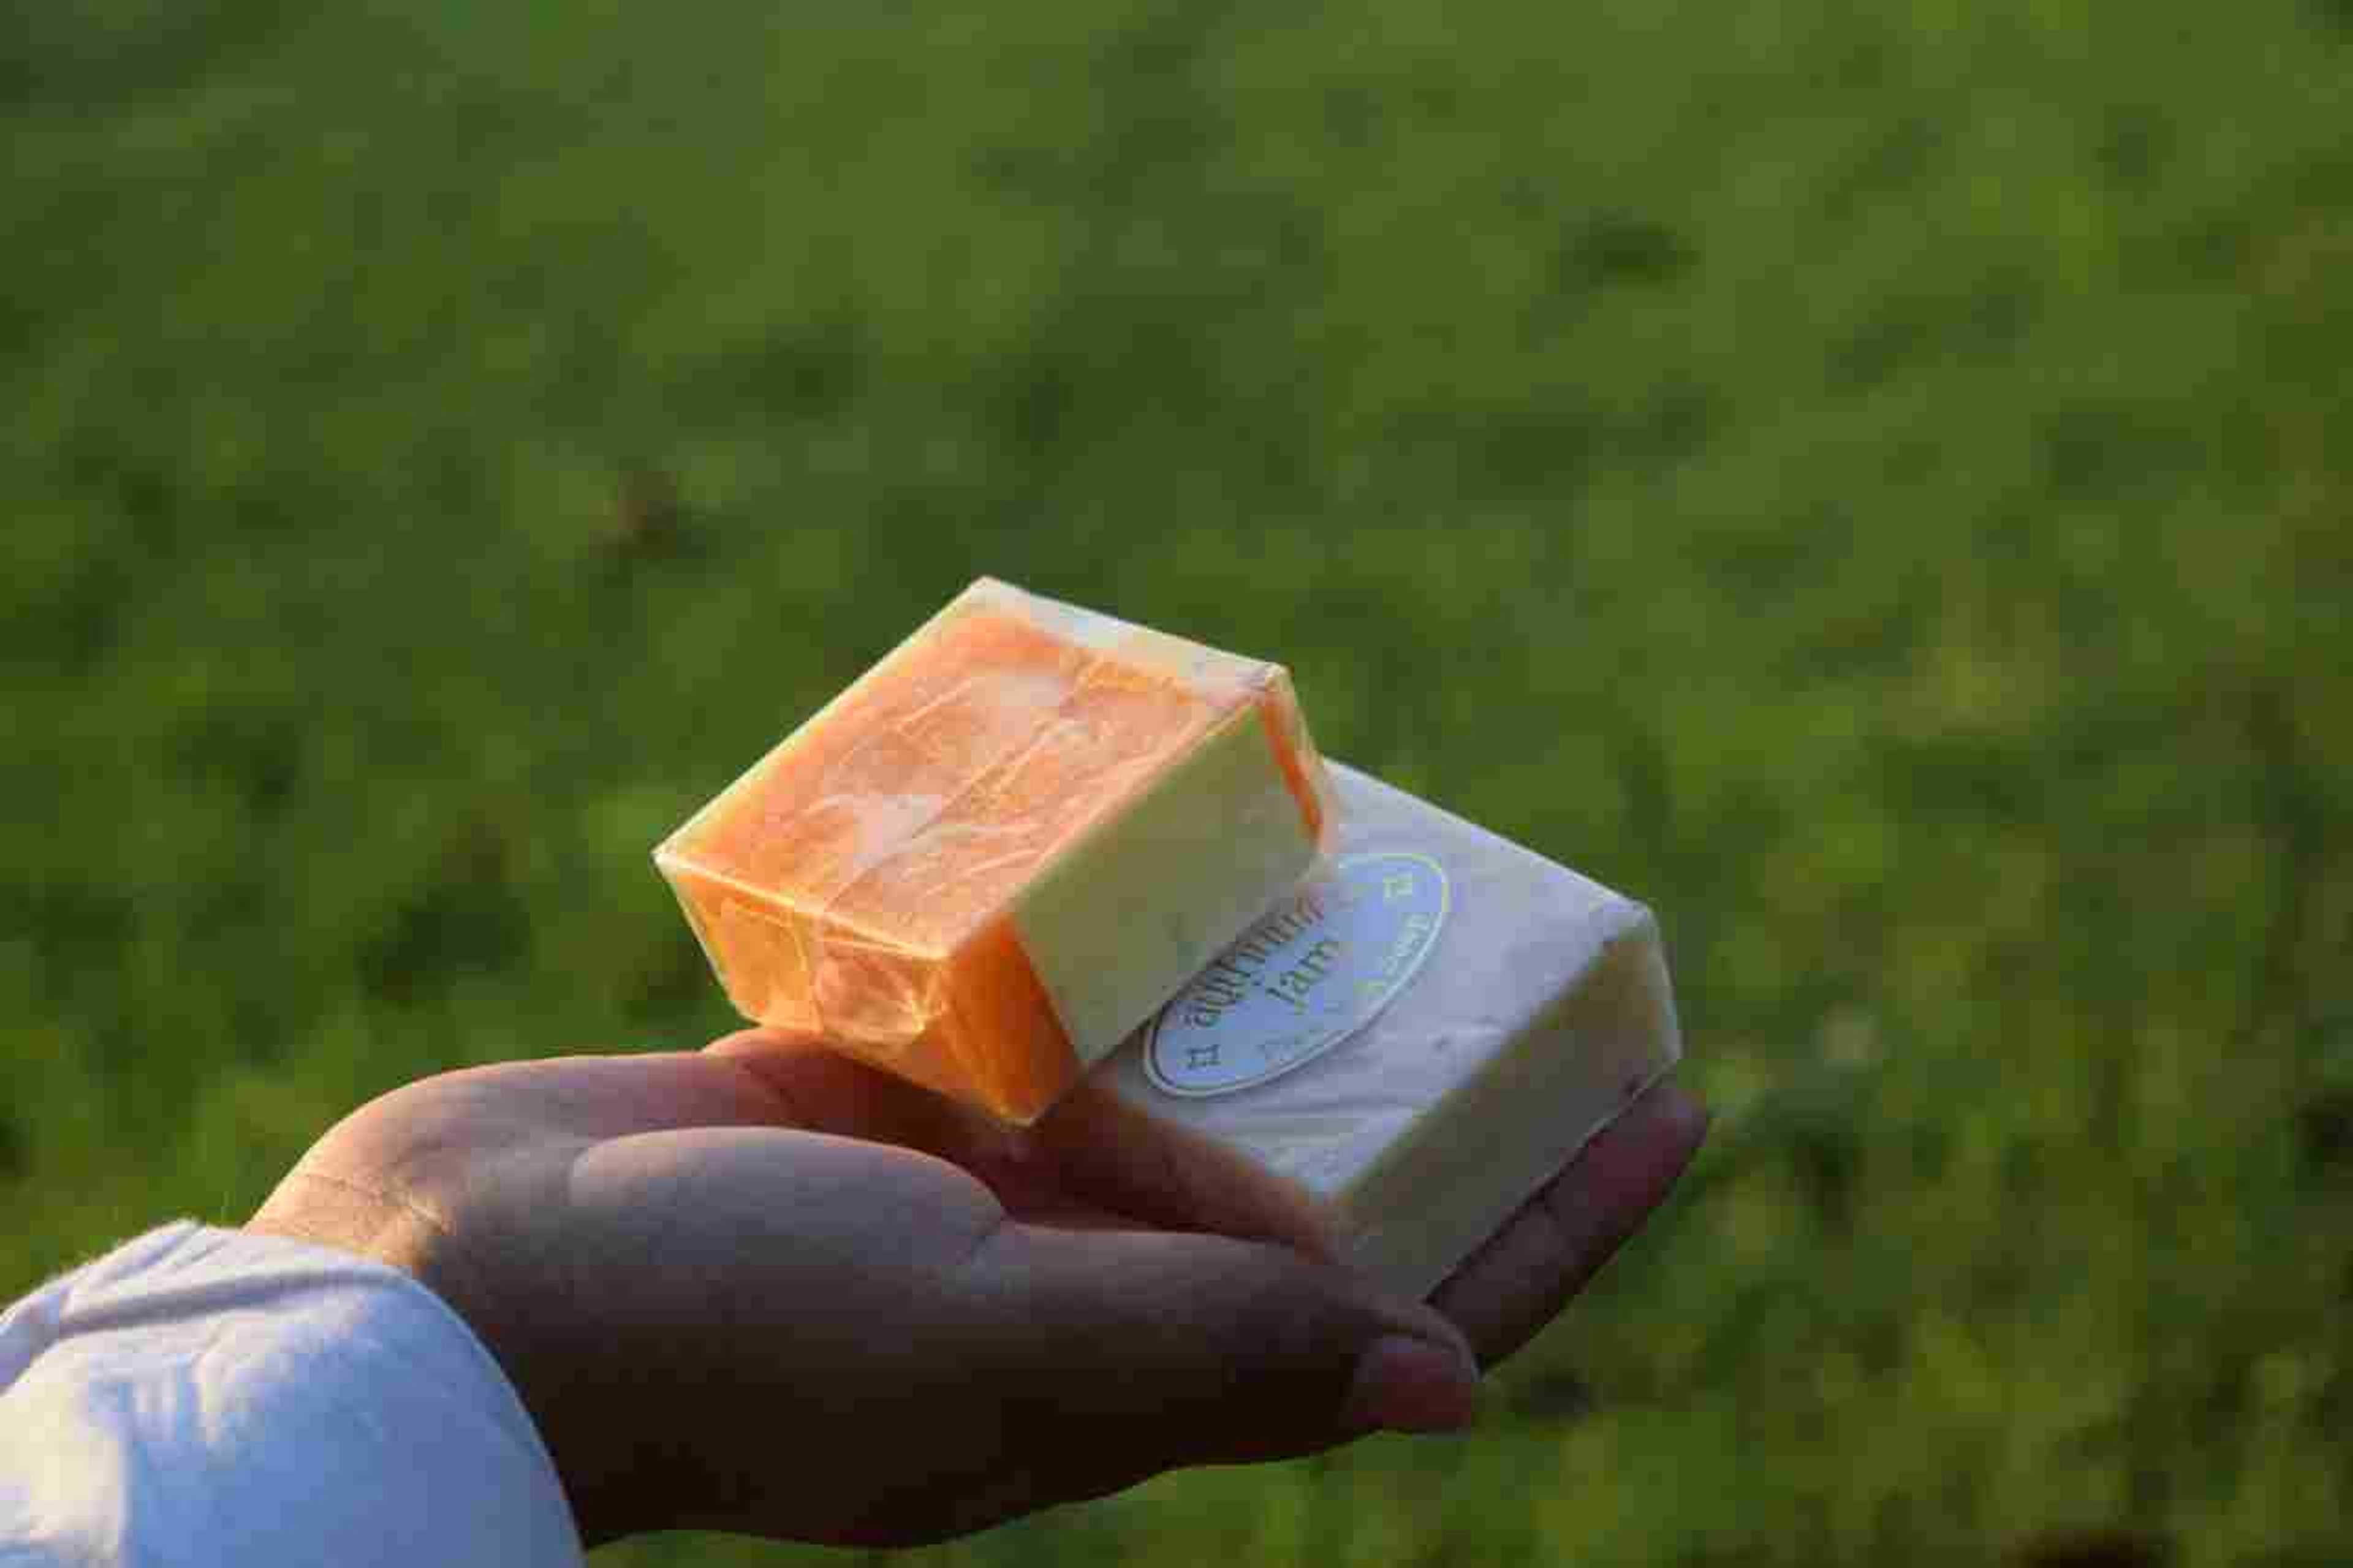 Orange Acne Soap and Deep Cleansing (Product of Mega Cosmetics)